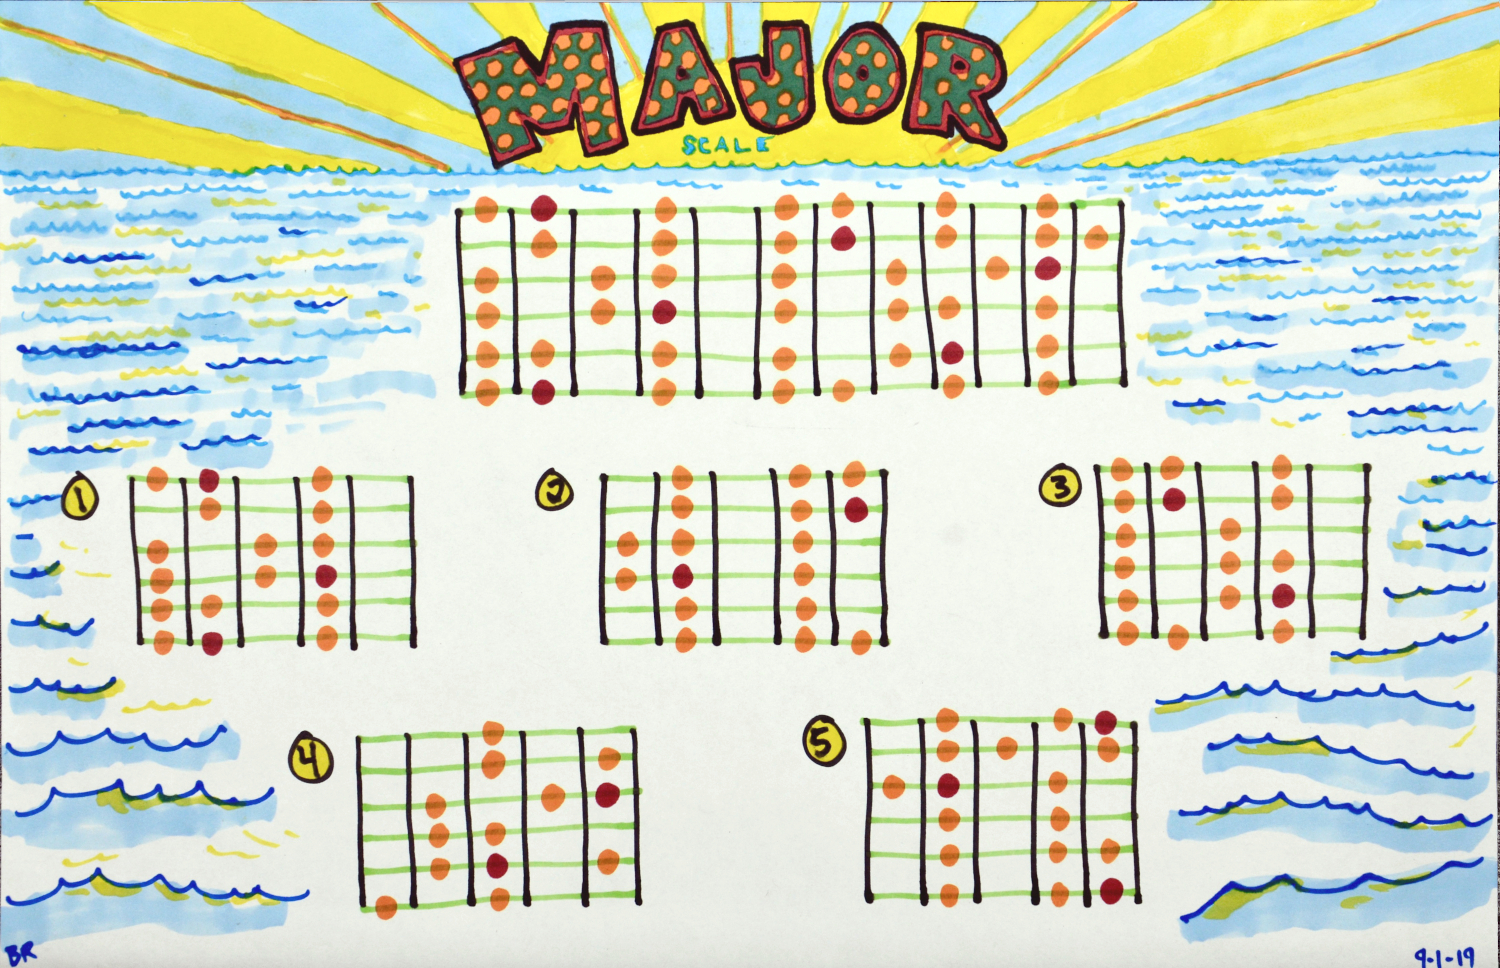 Major Scale guitar scale drawing, by Billy Reiter